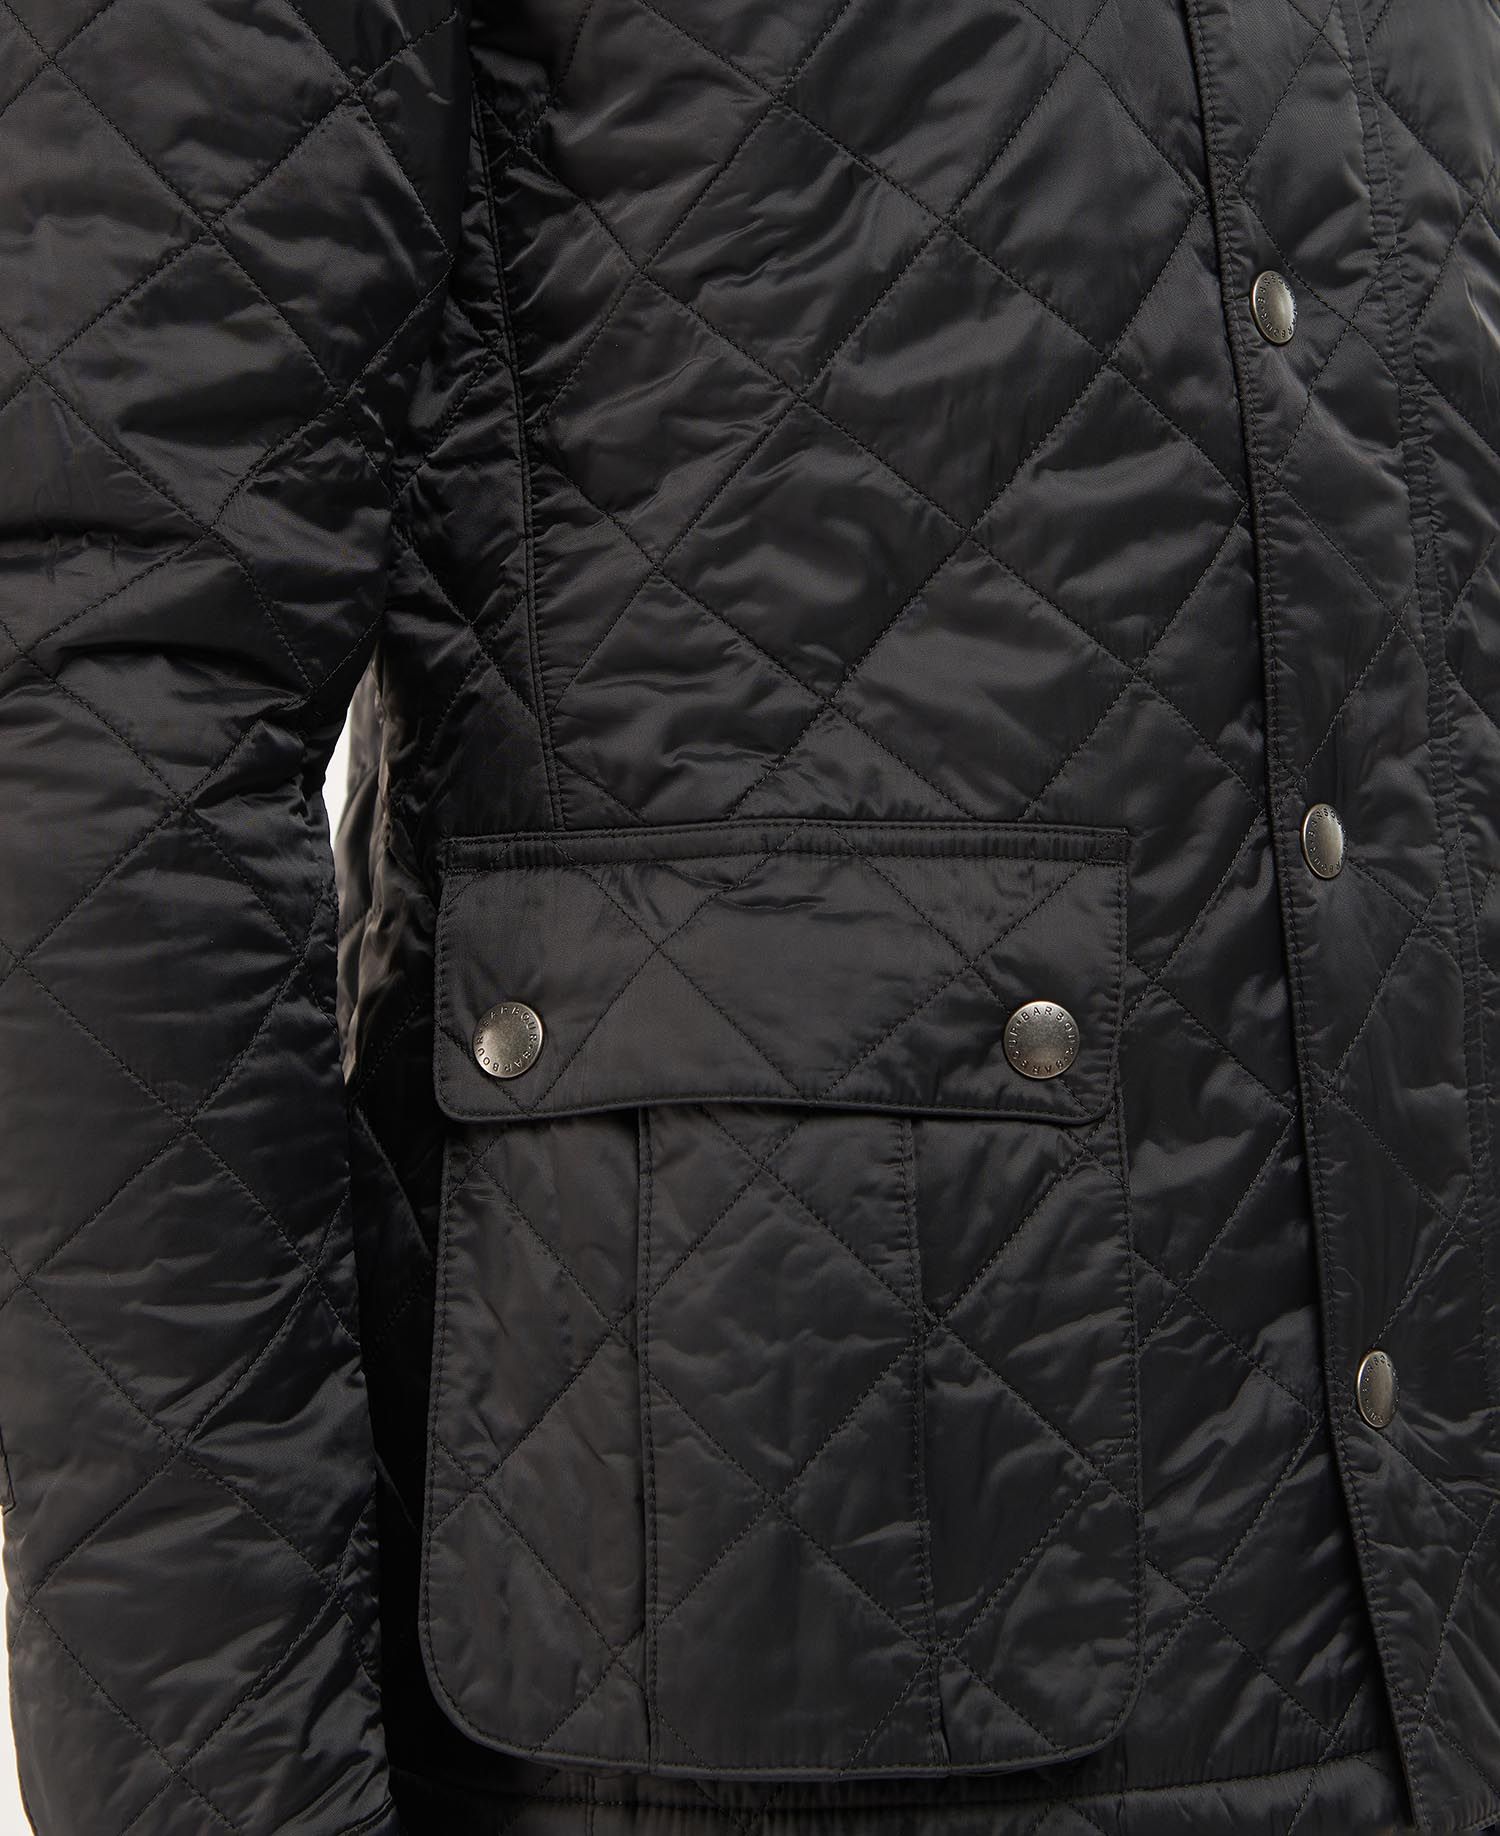 Shop the B.Intl Tourer Ariel Quilted Jacket today. | Barbour